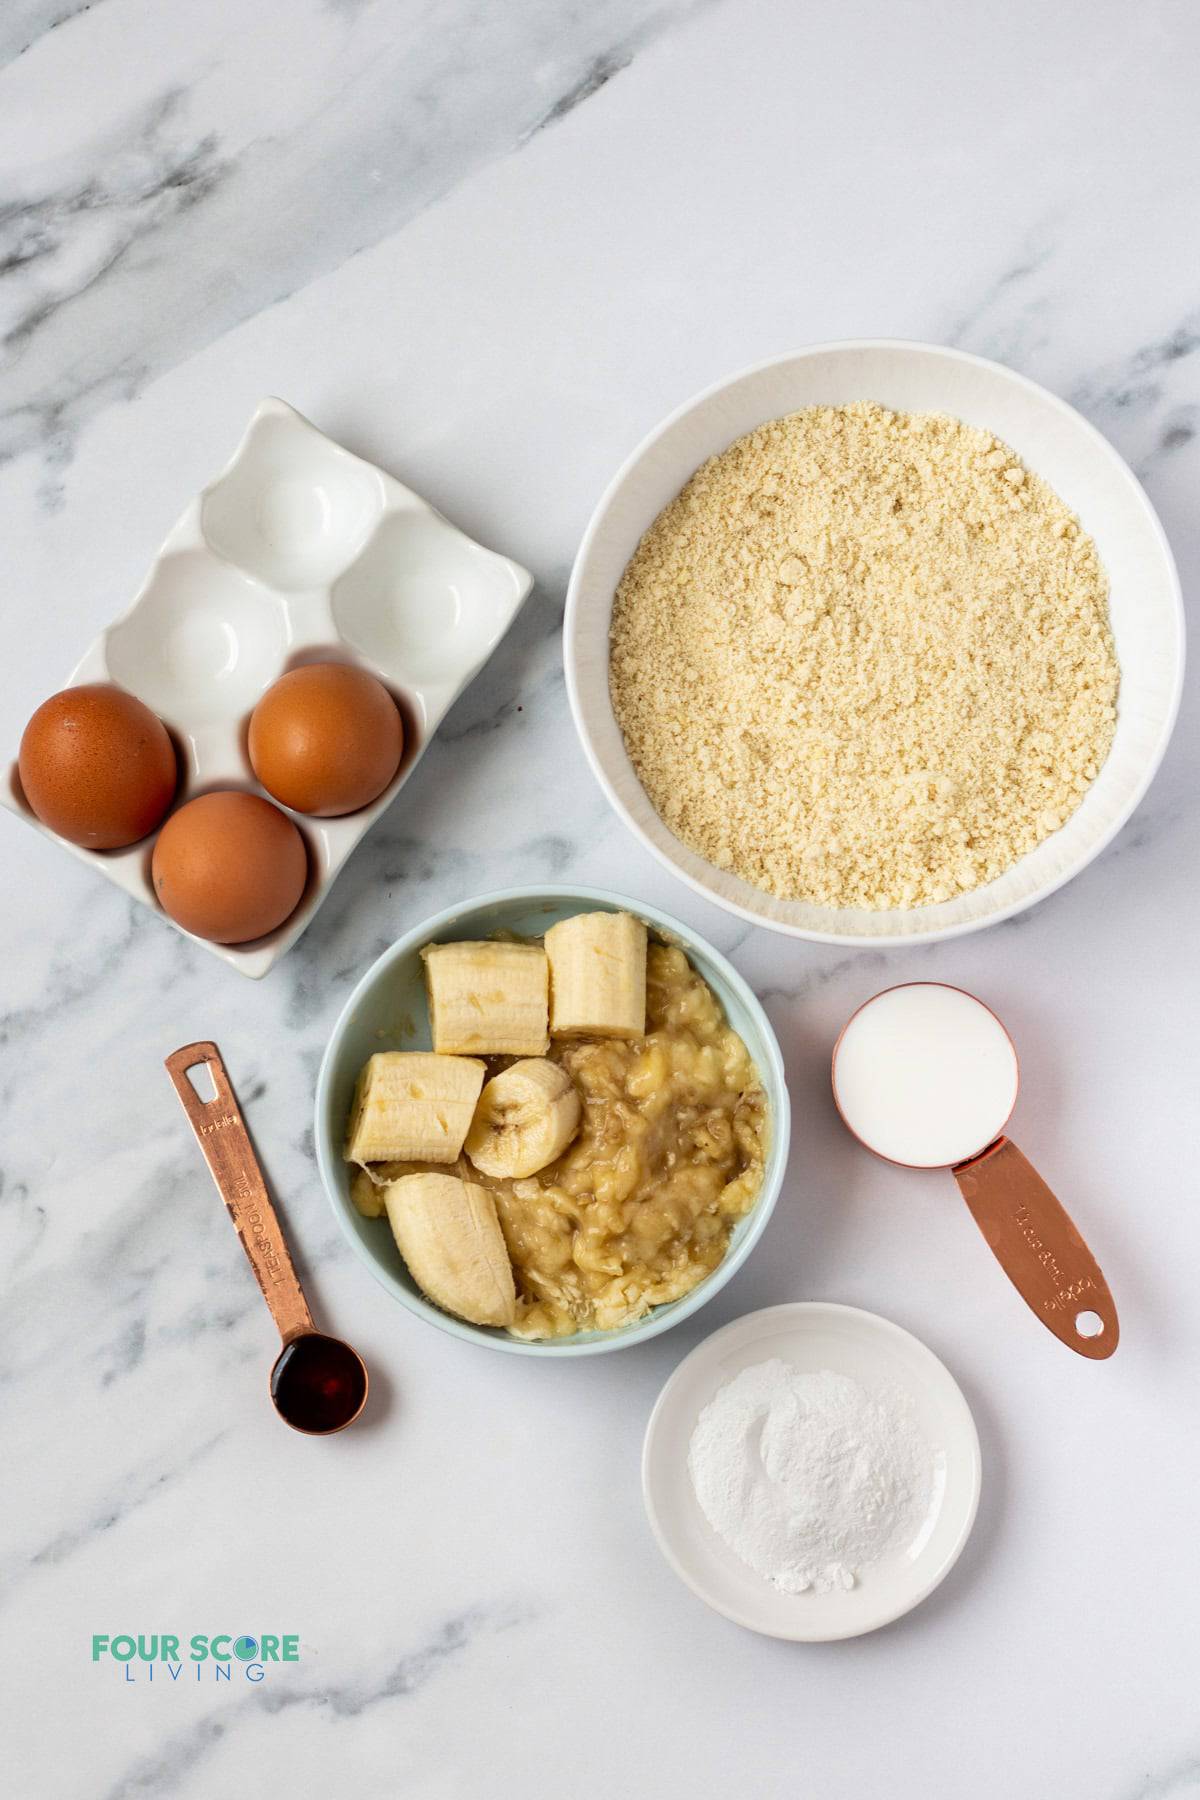 The ingredients needed to make almond flour banana pancakes, measured into separate bowls on a marble counter.